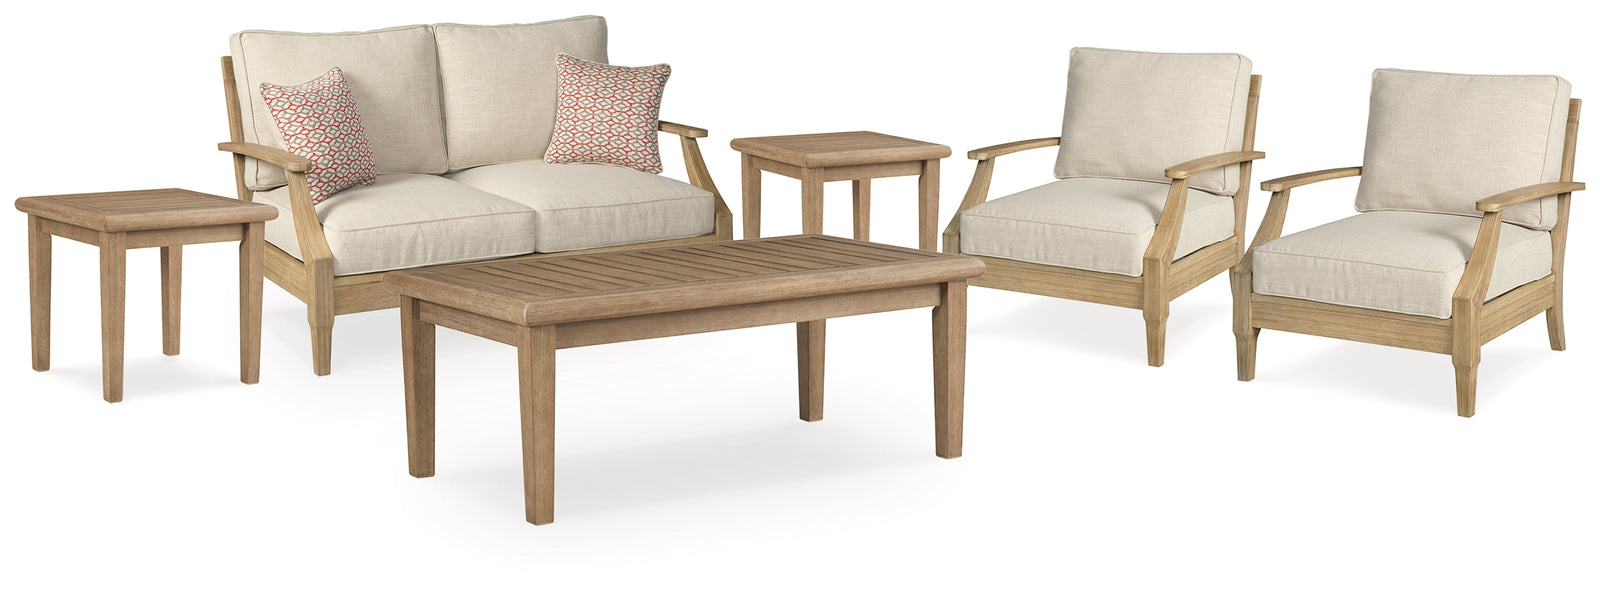 Clare Beige View Outdoor Loveseat And 2 Lounge Chairs With Coffee Table And 2 End Tables